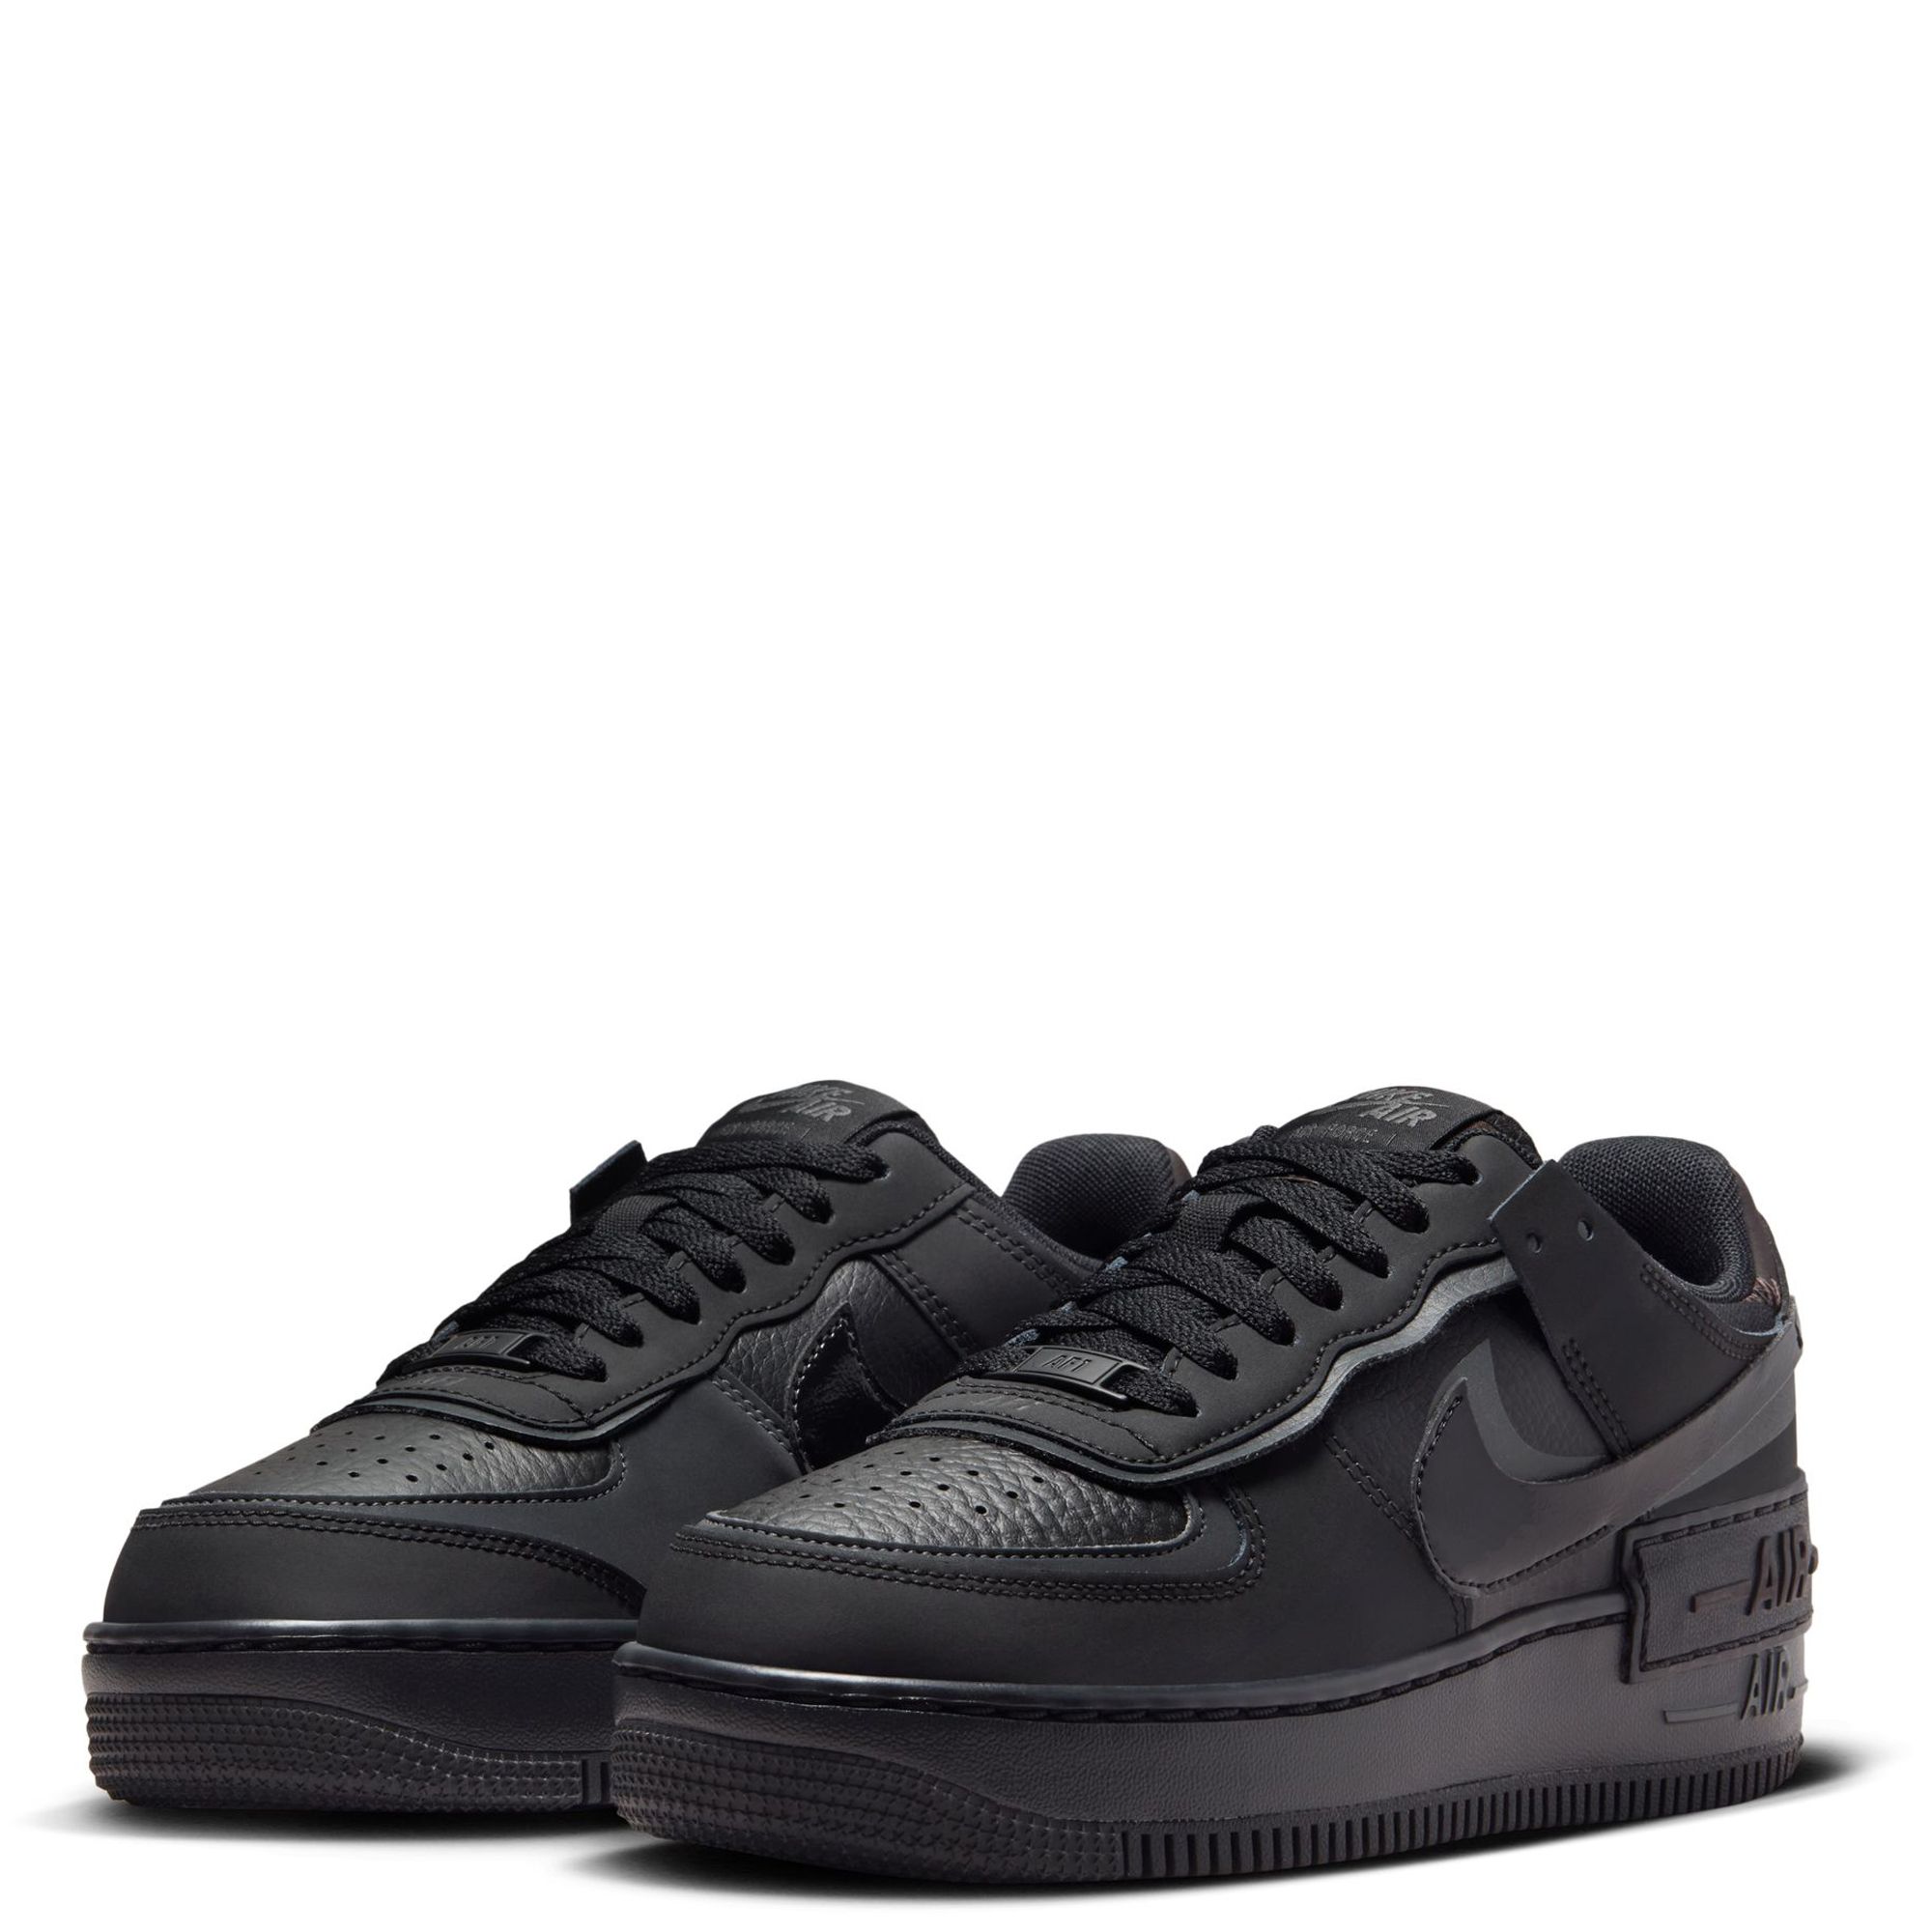 Nike Air Force 1 '07 LV8 3 Black/Anthracite